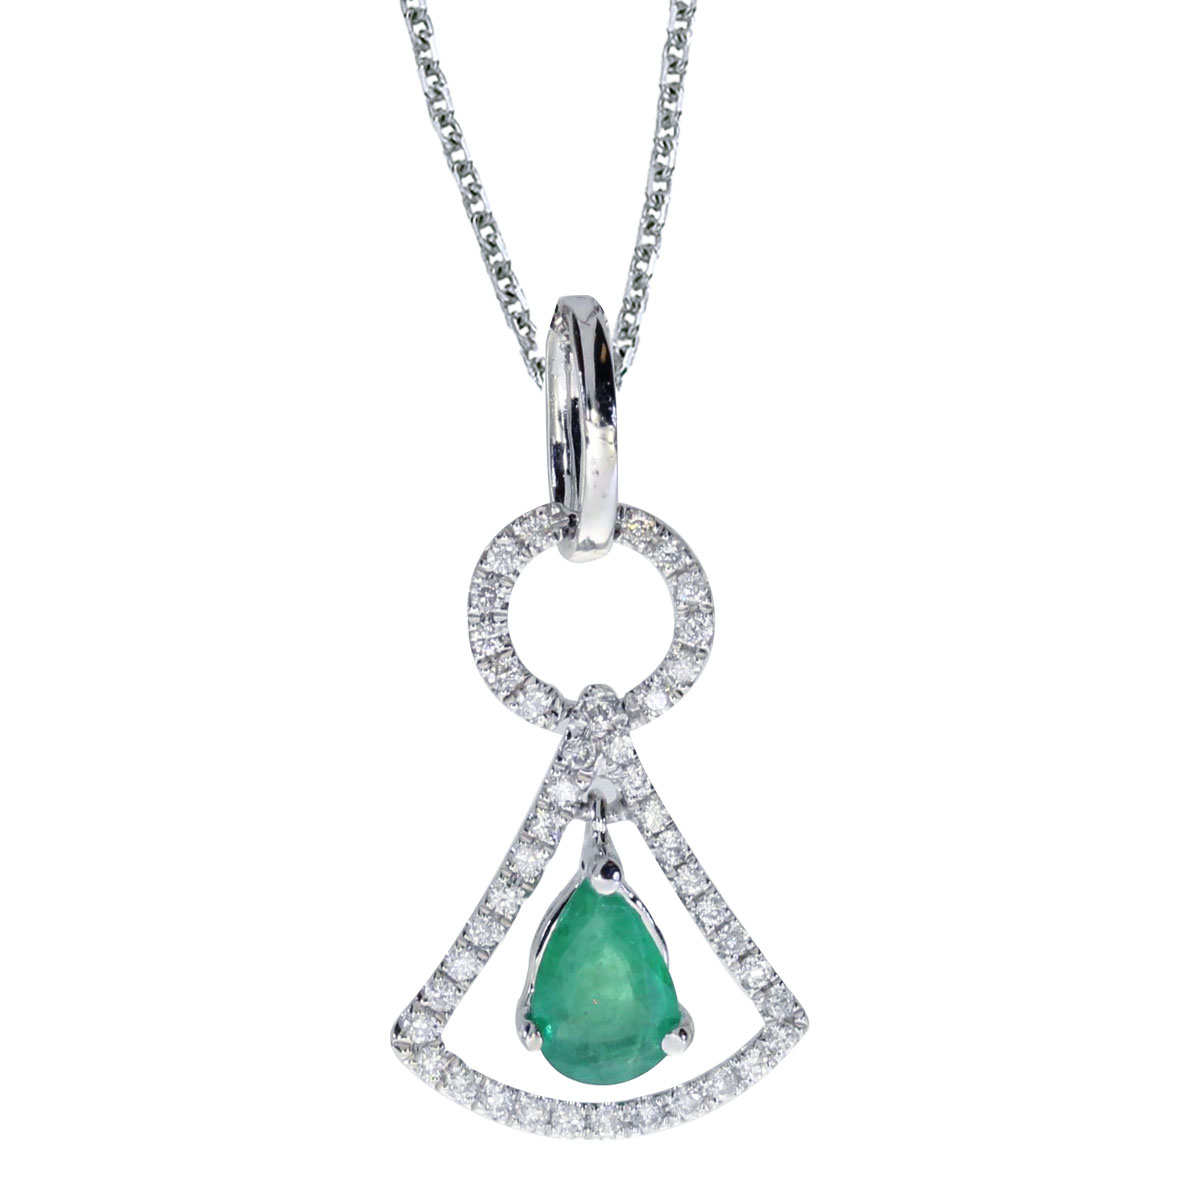 JCX2604: This unique 14k white gold pendant features a striking 6x4 mm pear emerald and .16 carats of shimmering diamonds.